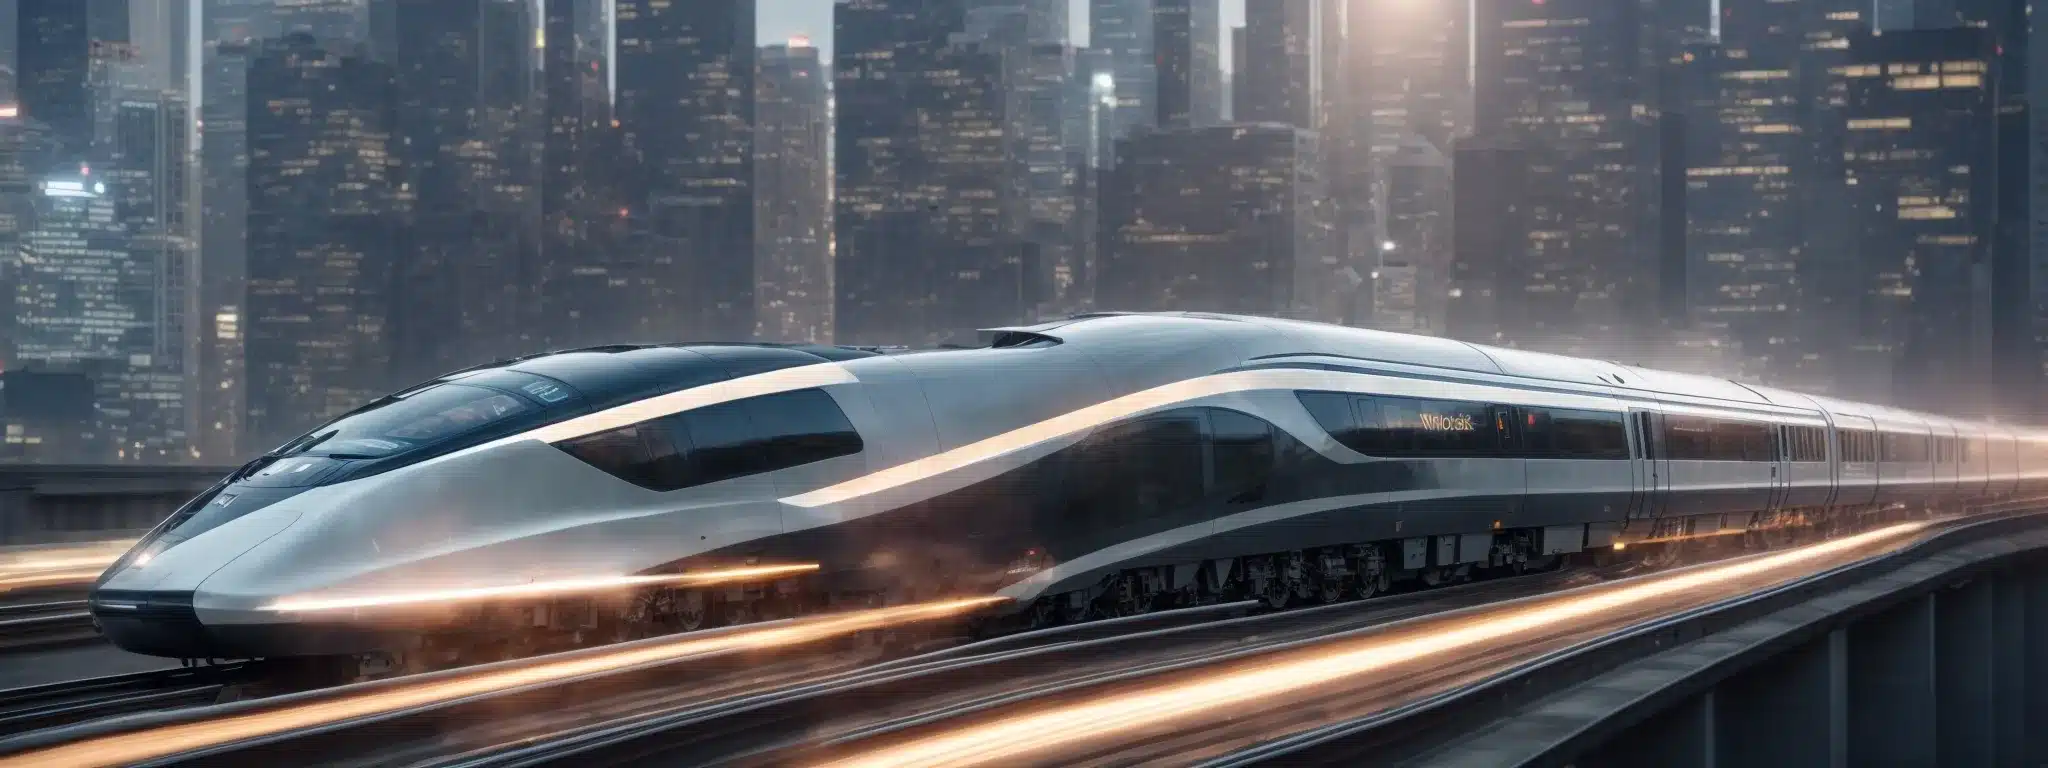 A Sleek High-Speed Train Whooshes Through A Futuristic Cityscape, Symbolizing The Acceleration And Efficiency Of Wordpress Performance Tuning.